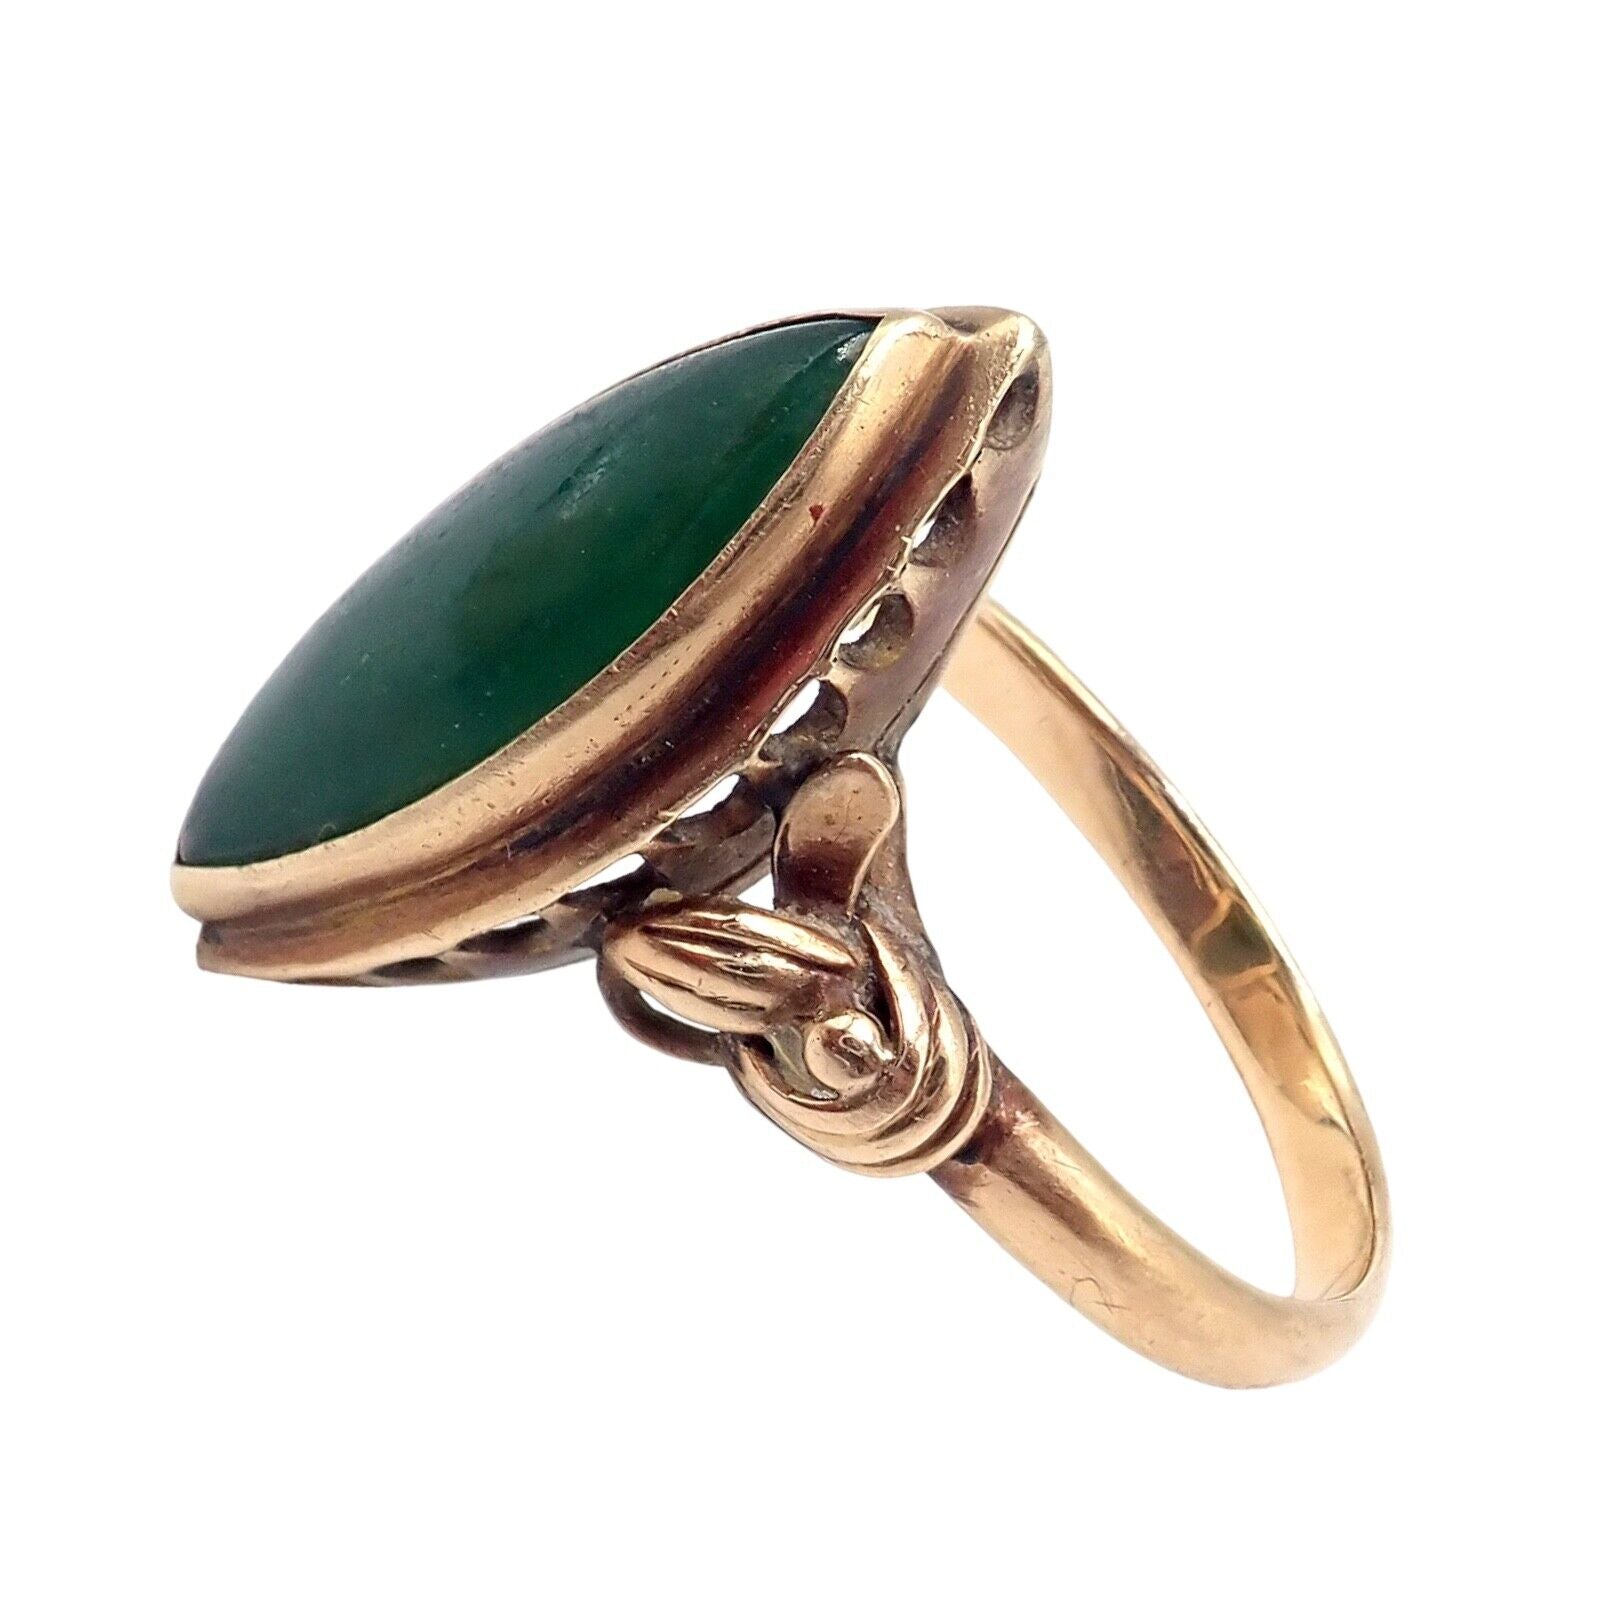 CJ Caribe Jewelry & Watches:Vintage & Antique Jewelry:Rings Vintage Estate 14k Yellow Gold Green Stone Art Deco CJ Caribe Ring sz 6.5